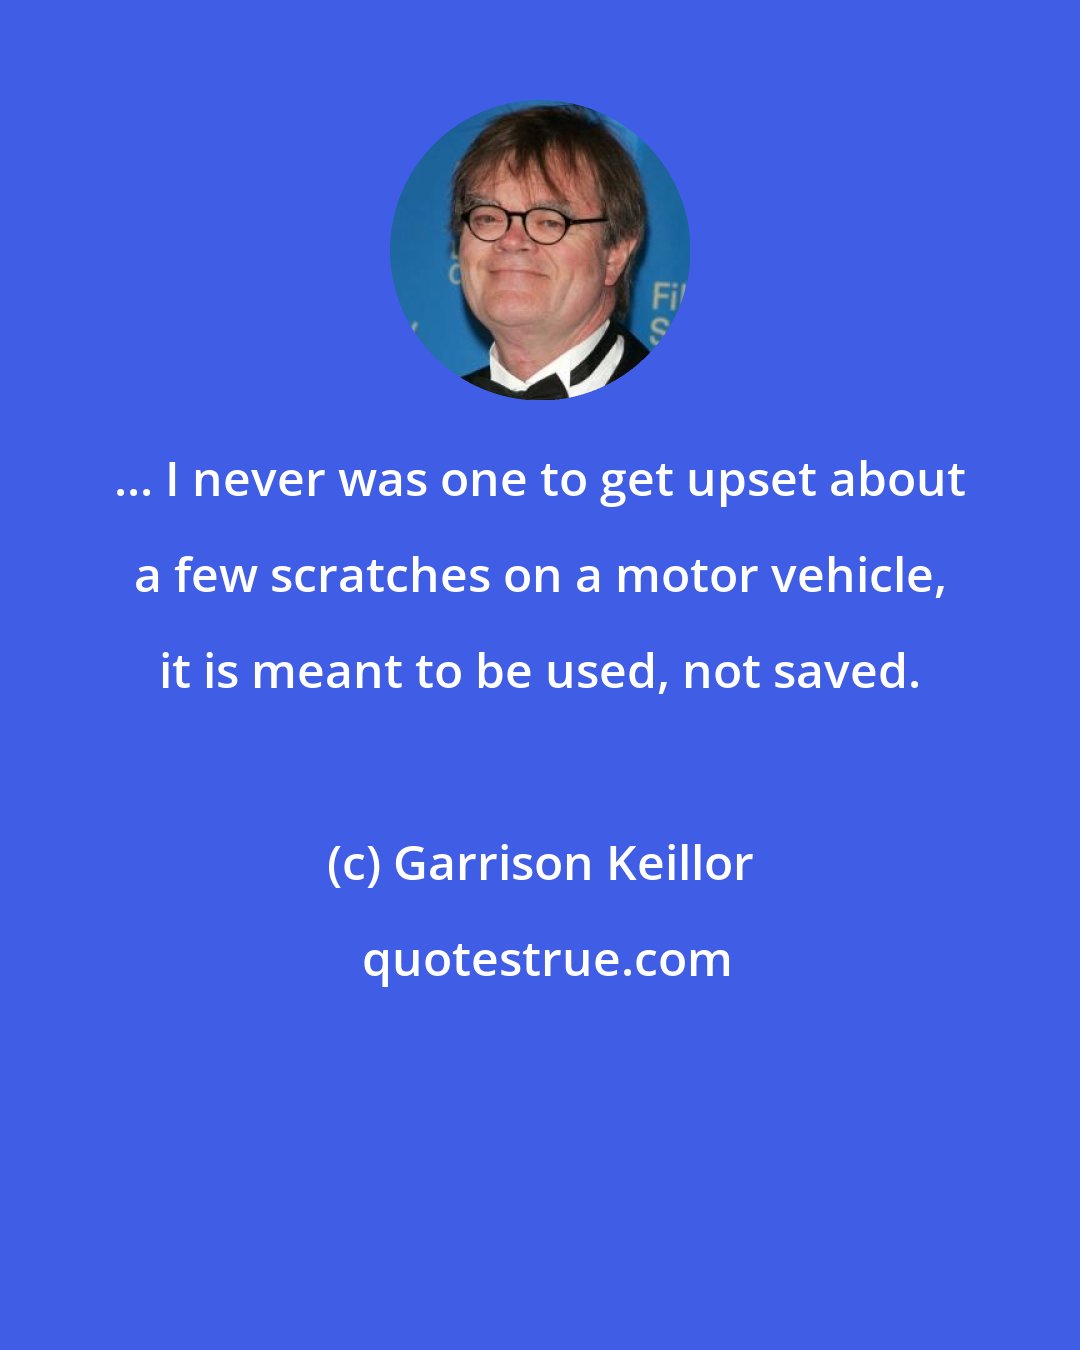 Garrison Keillor: ... I never was one to get upset about a few scratches on a motor vehicle, it is meant to be used, not saved.